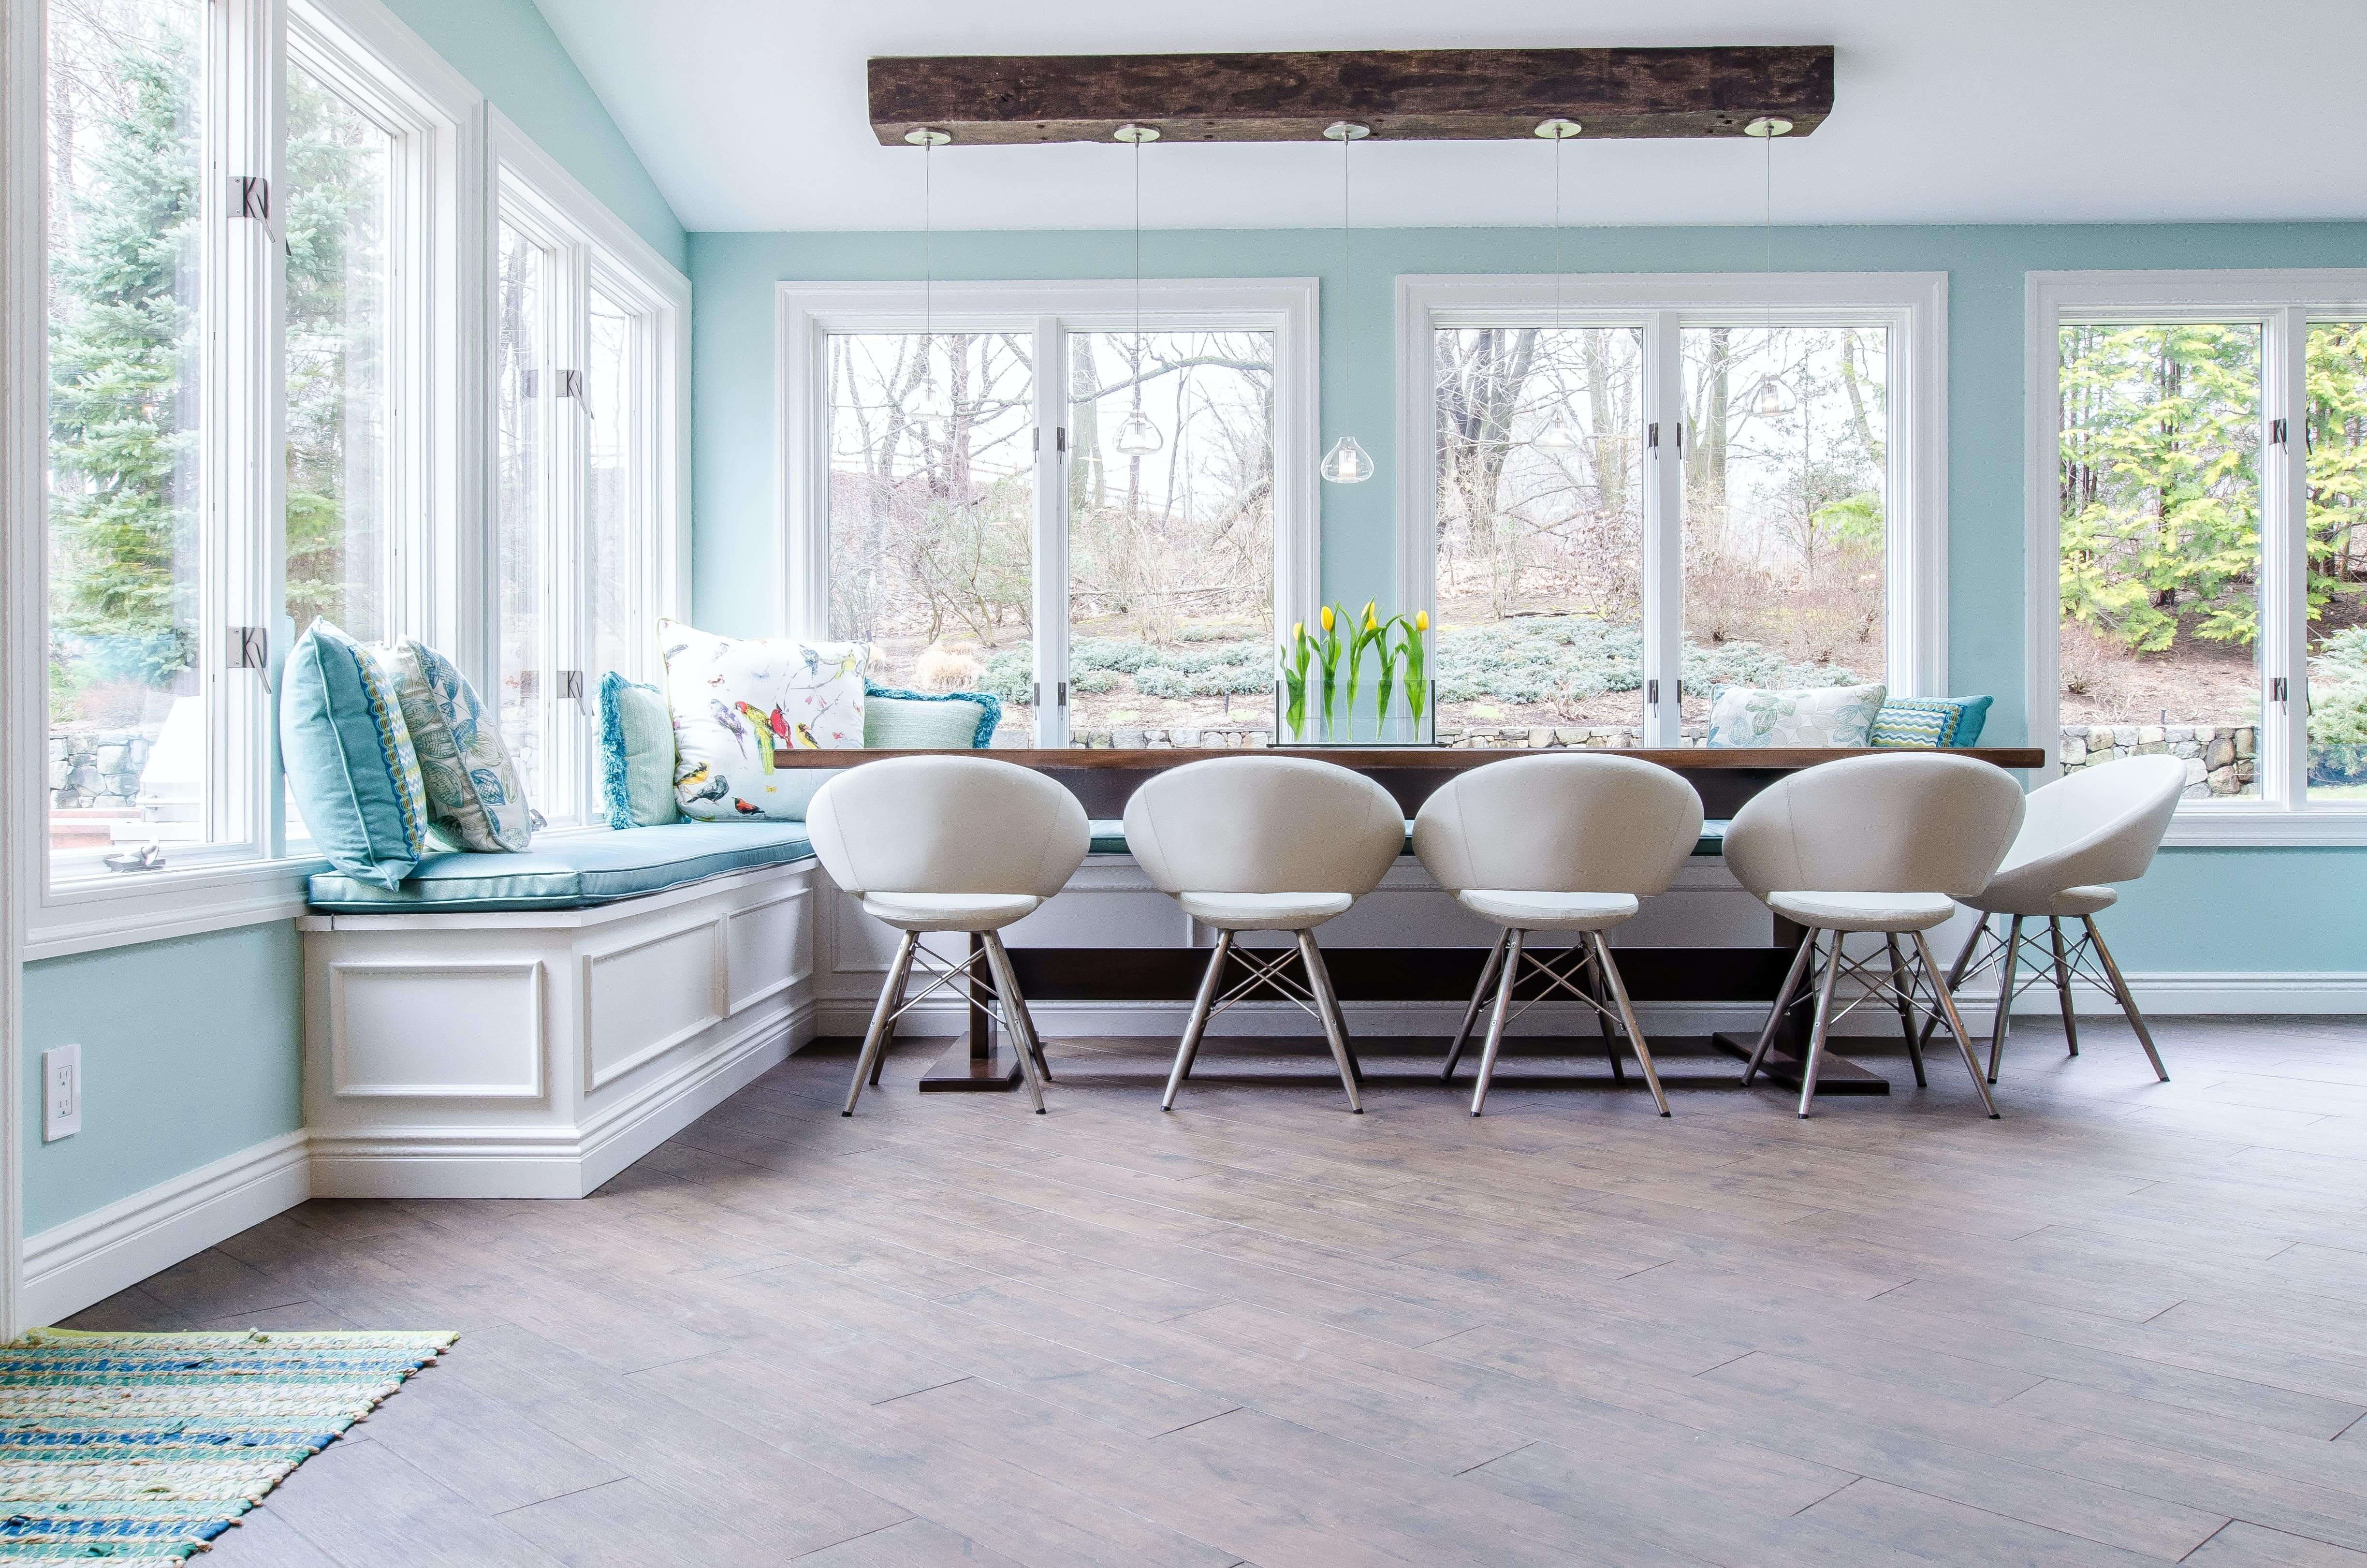 A light blue breakfast nook with built in bench and table with chairs